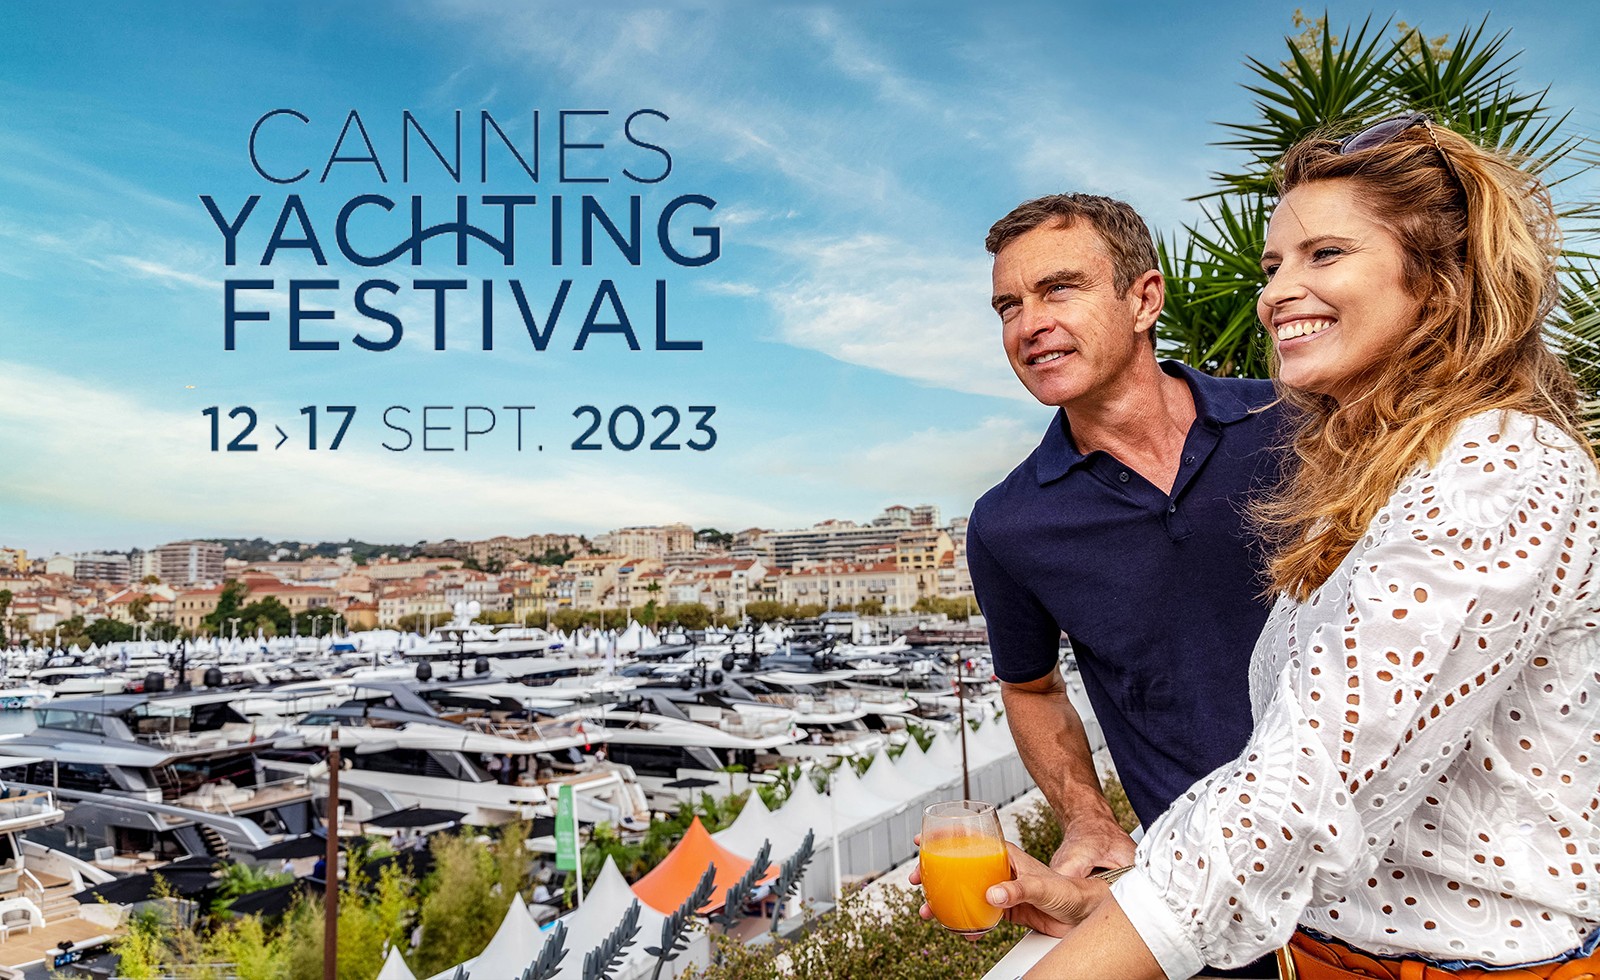 Countdown to the Cannes Yachting Festival 2023!